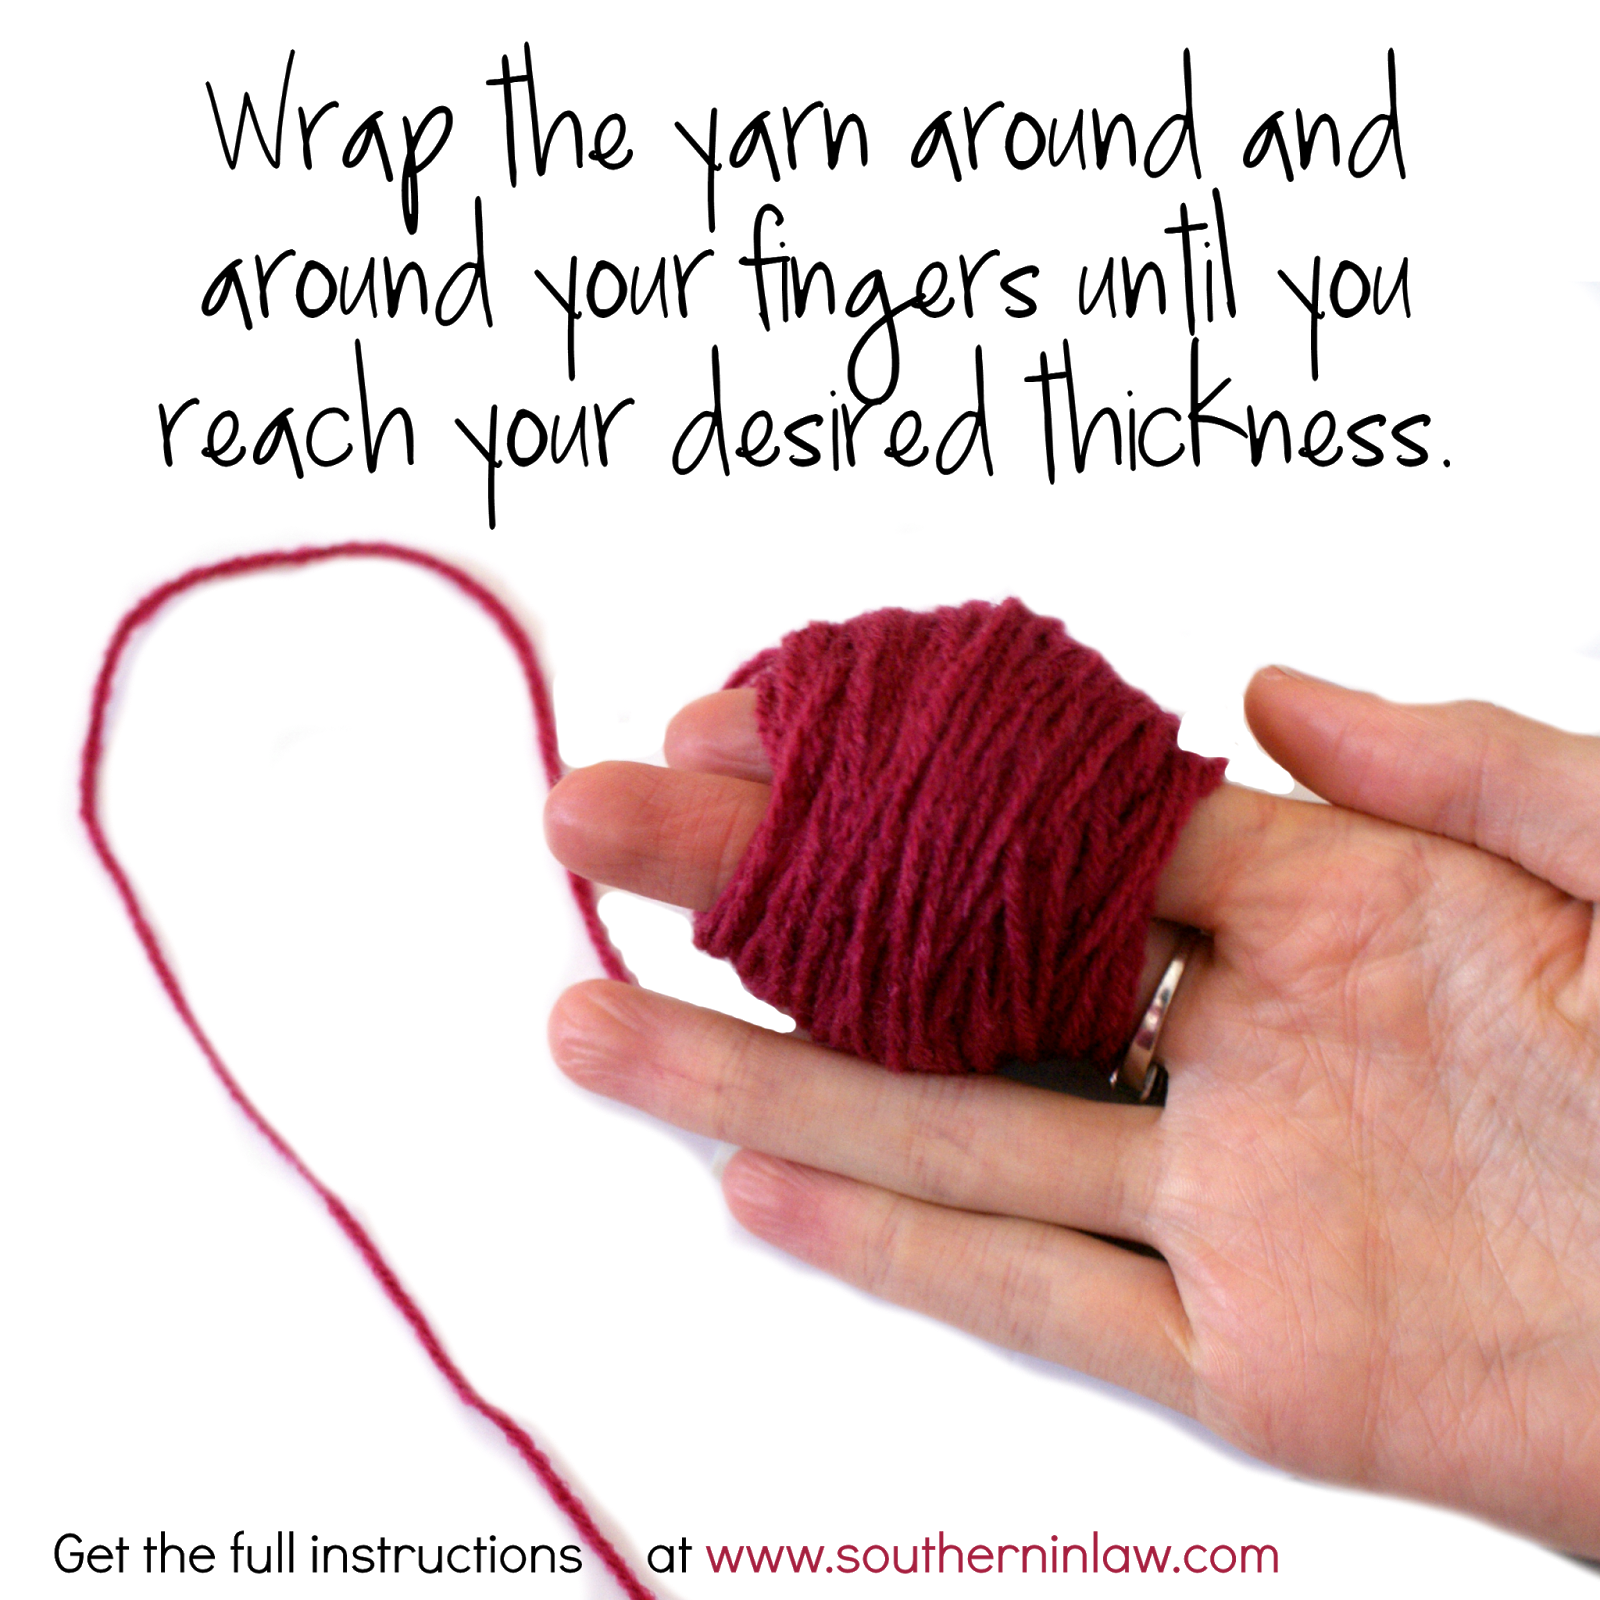 How to Make a Pom Pom Garland on a Budget - Easy DIY Pom Pom Craft Tutorial  - How to Make a Pom Pom Using Your FIngers